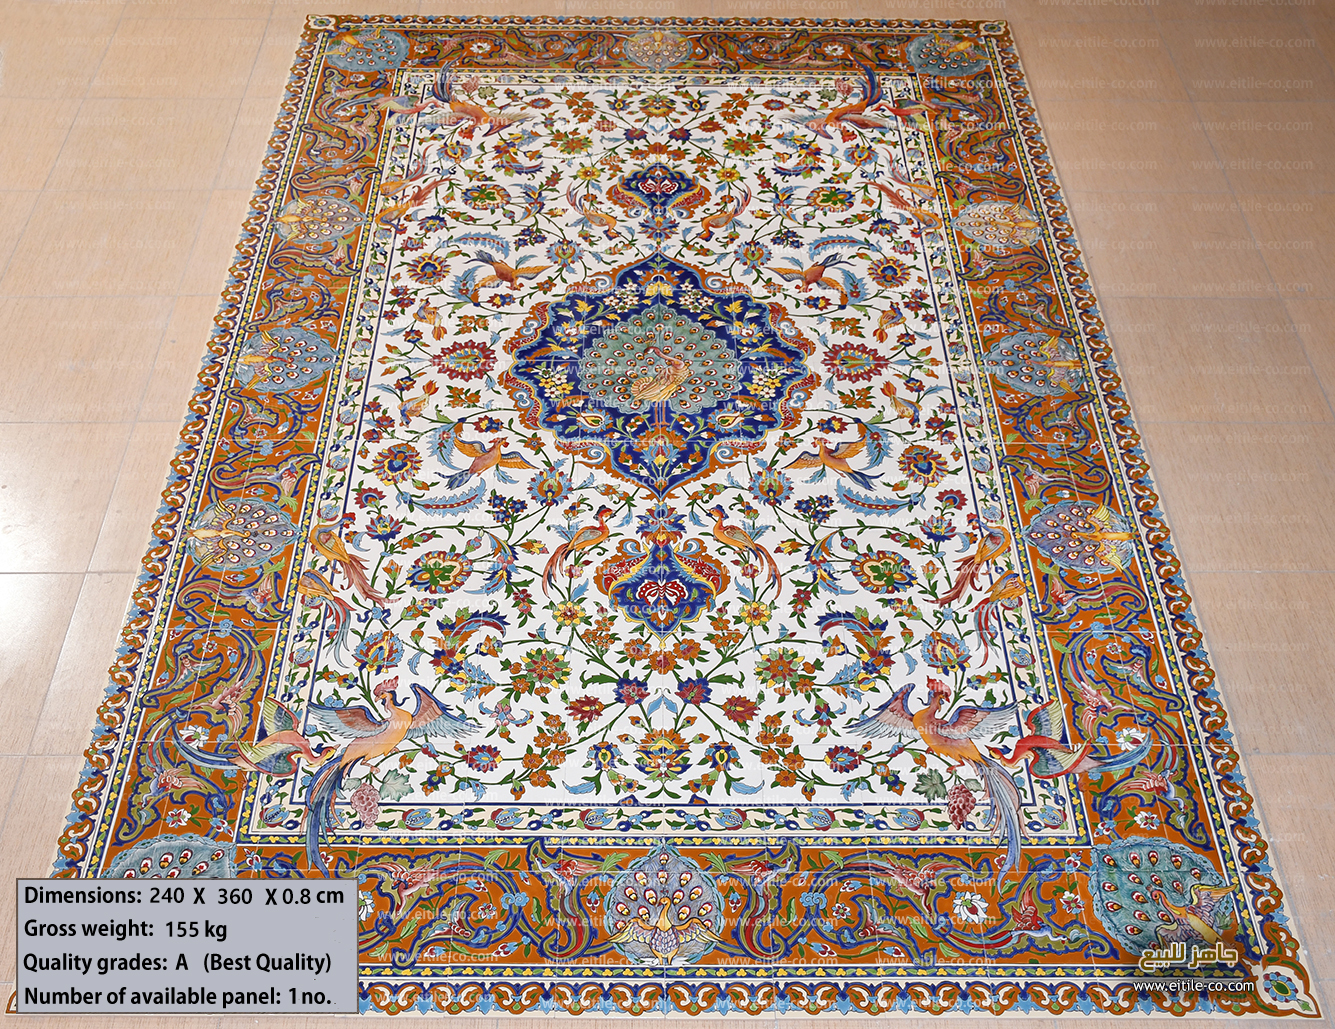 Ceramic tiles with carpet design ready for sale now, www.eitile-co.com